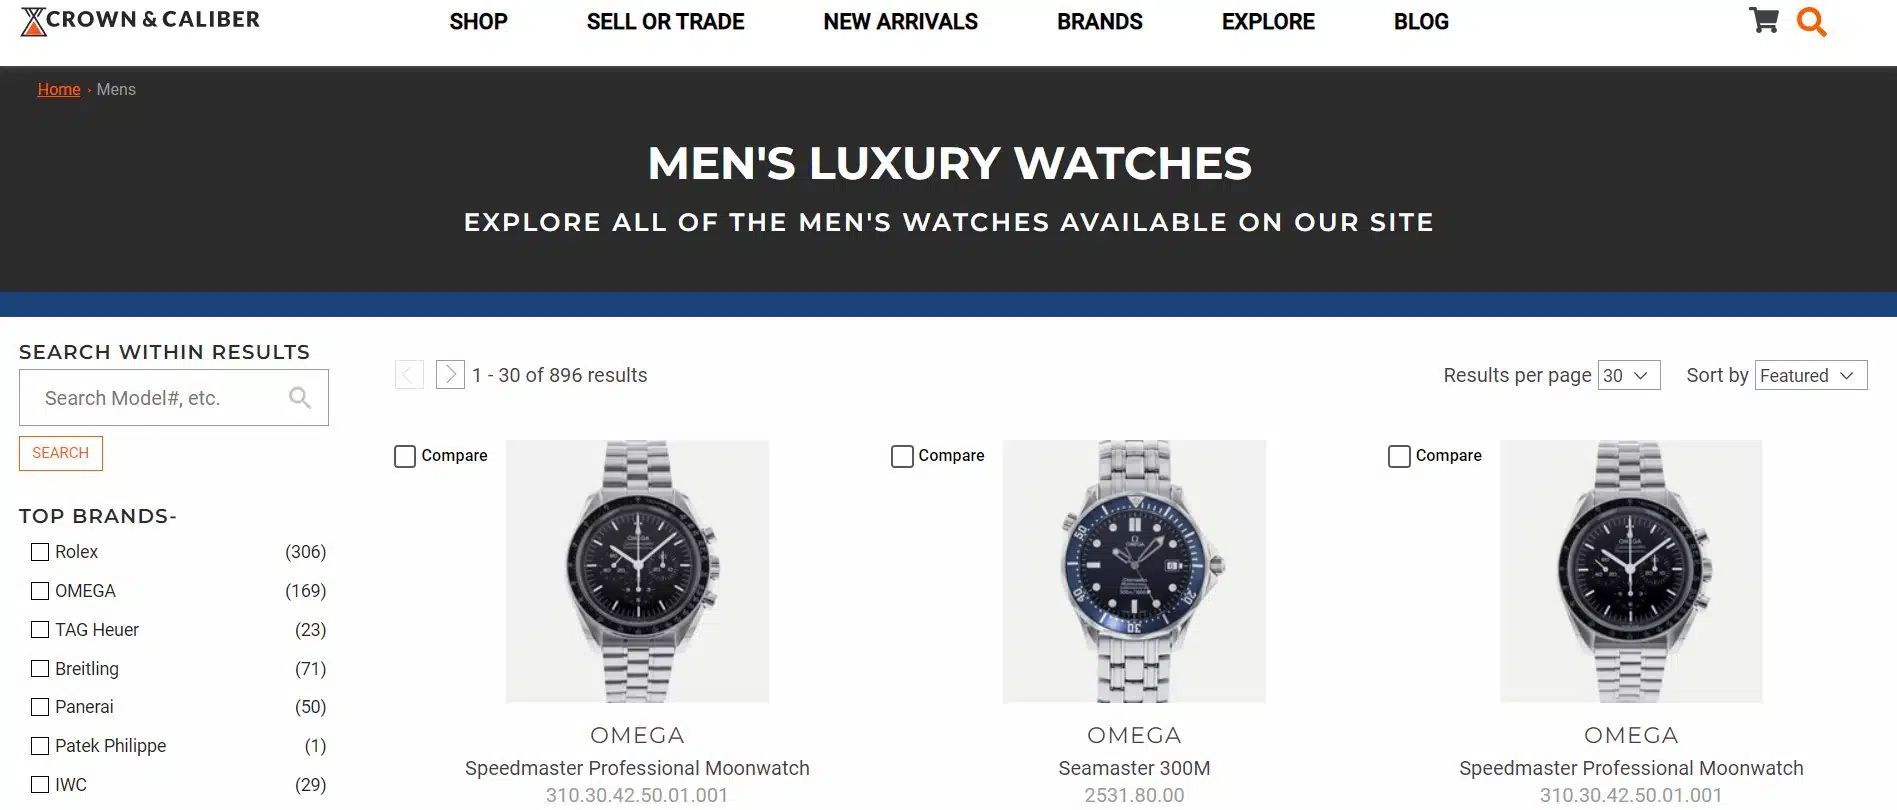 Crown and Caliber Mens Watches Page